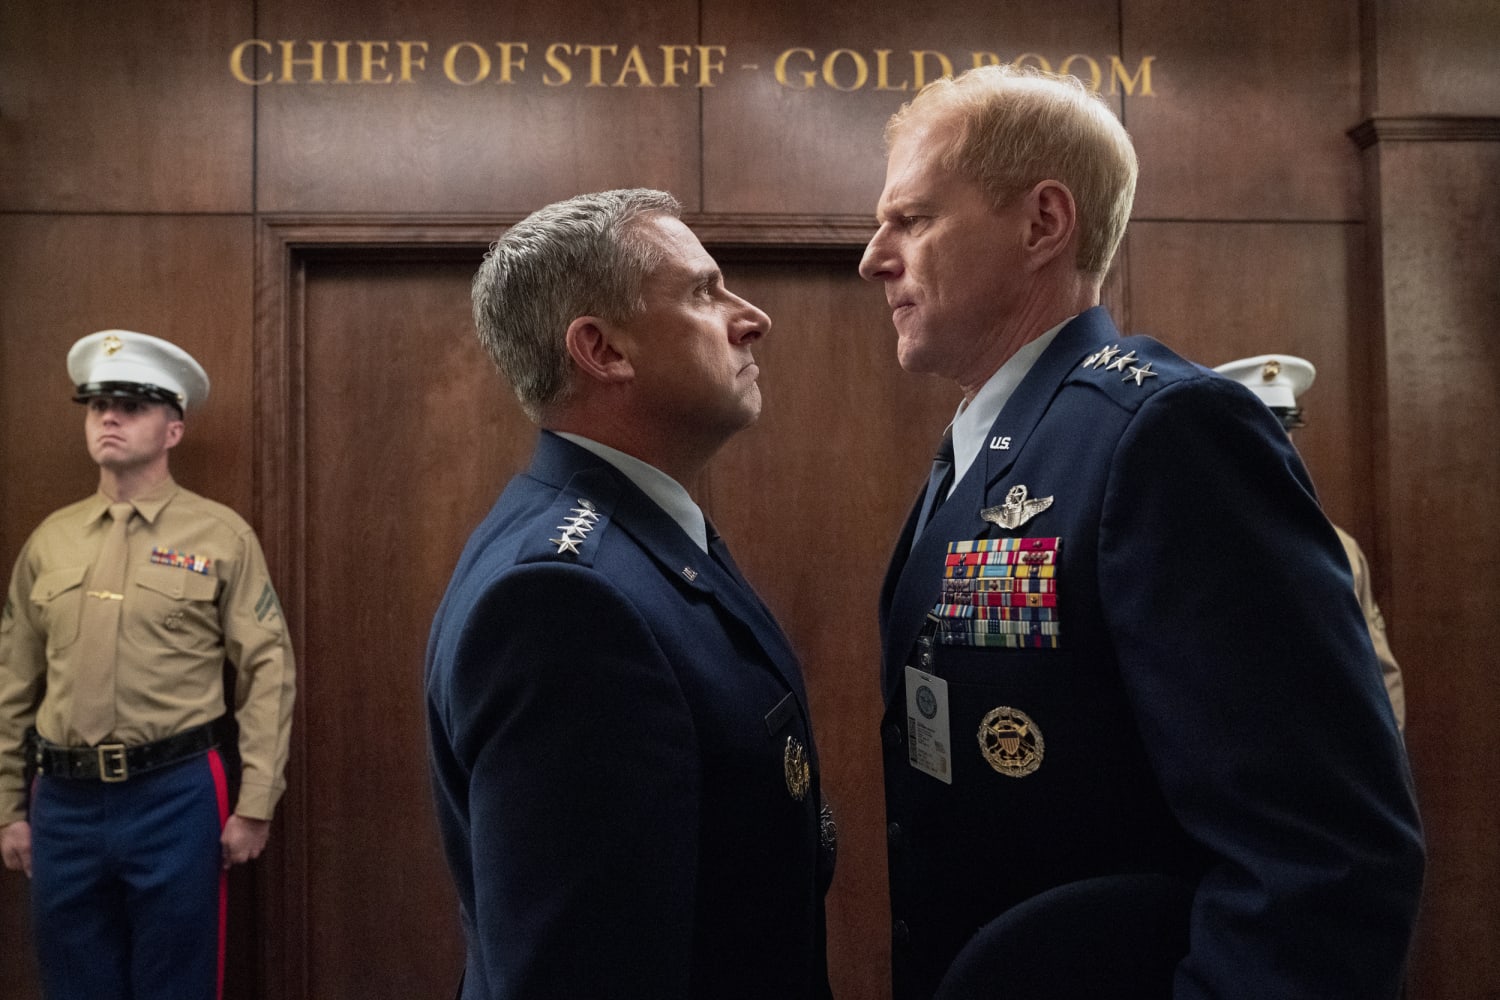 Netflix comedy 'Space Force' shows real military branch's struggle ...